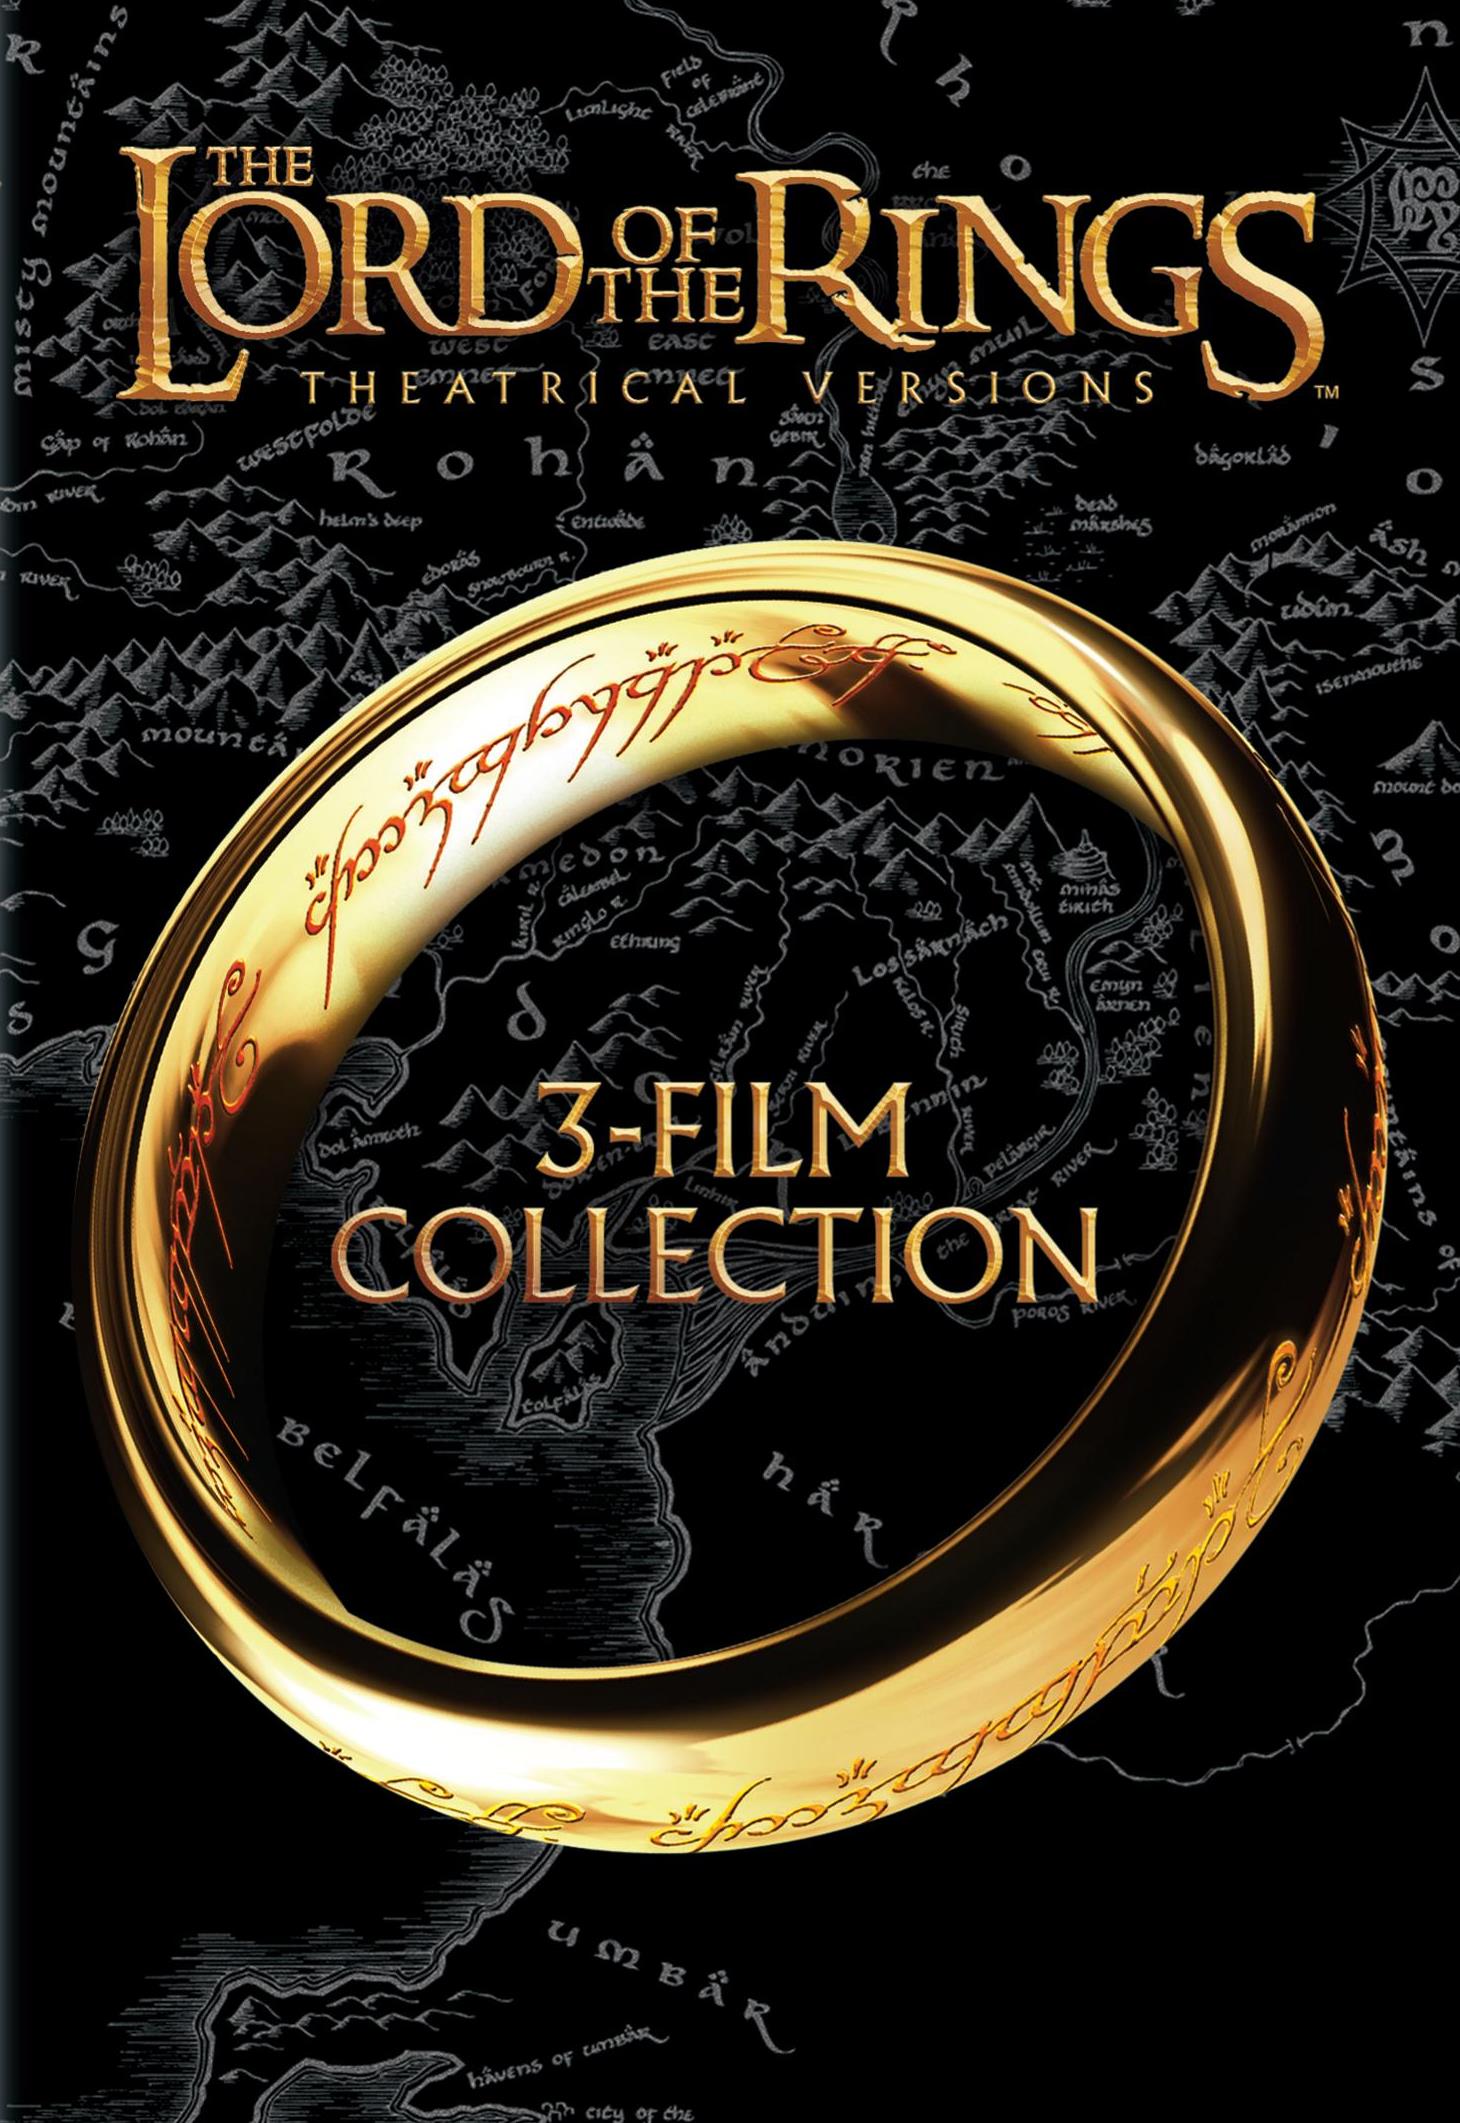 The Lord of the Rings: The Fellowship of the Ring Book I, Chapters 1-4  Summary and Analysis